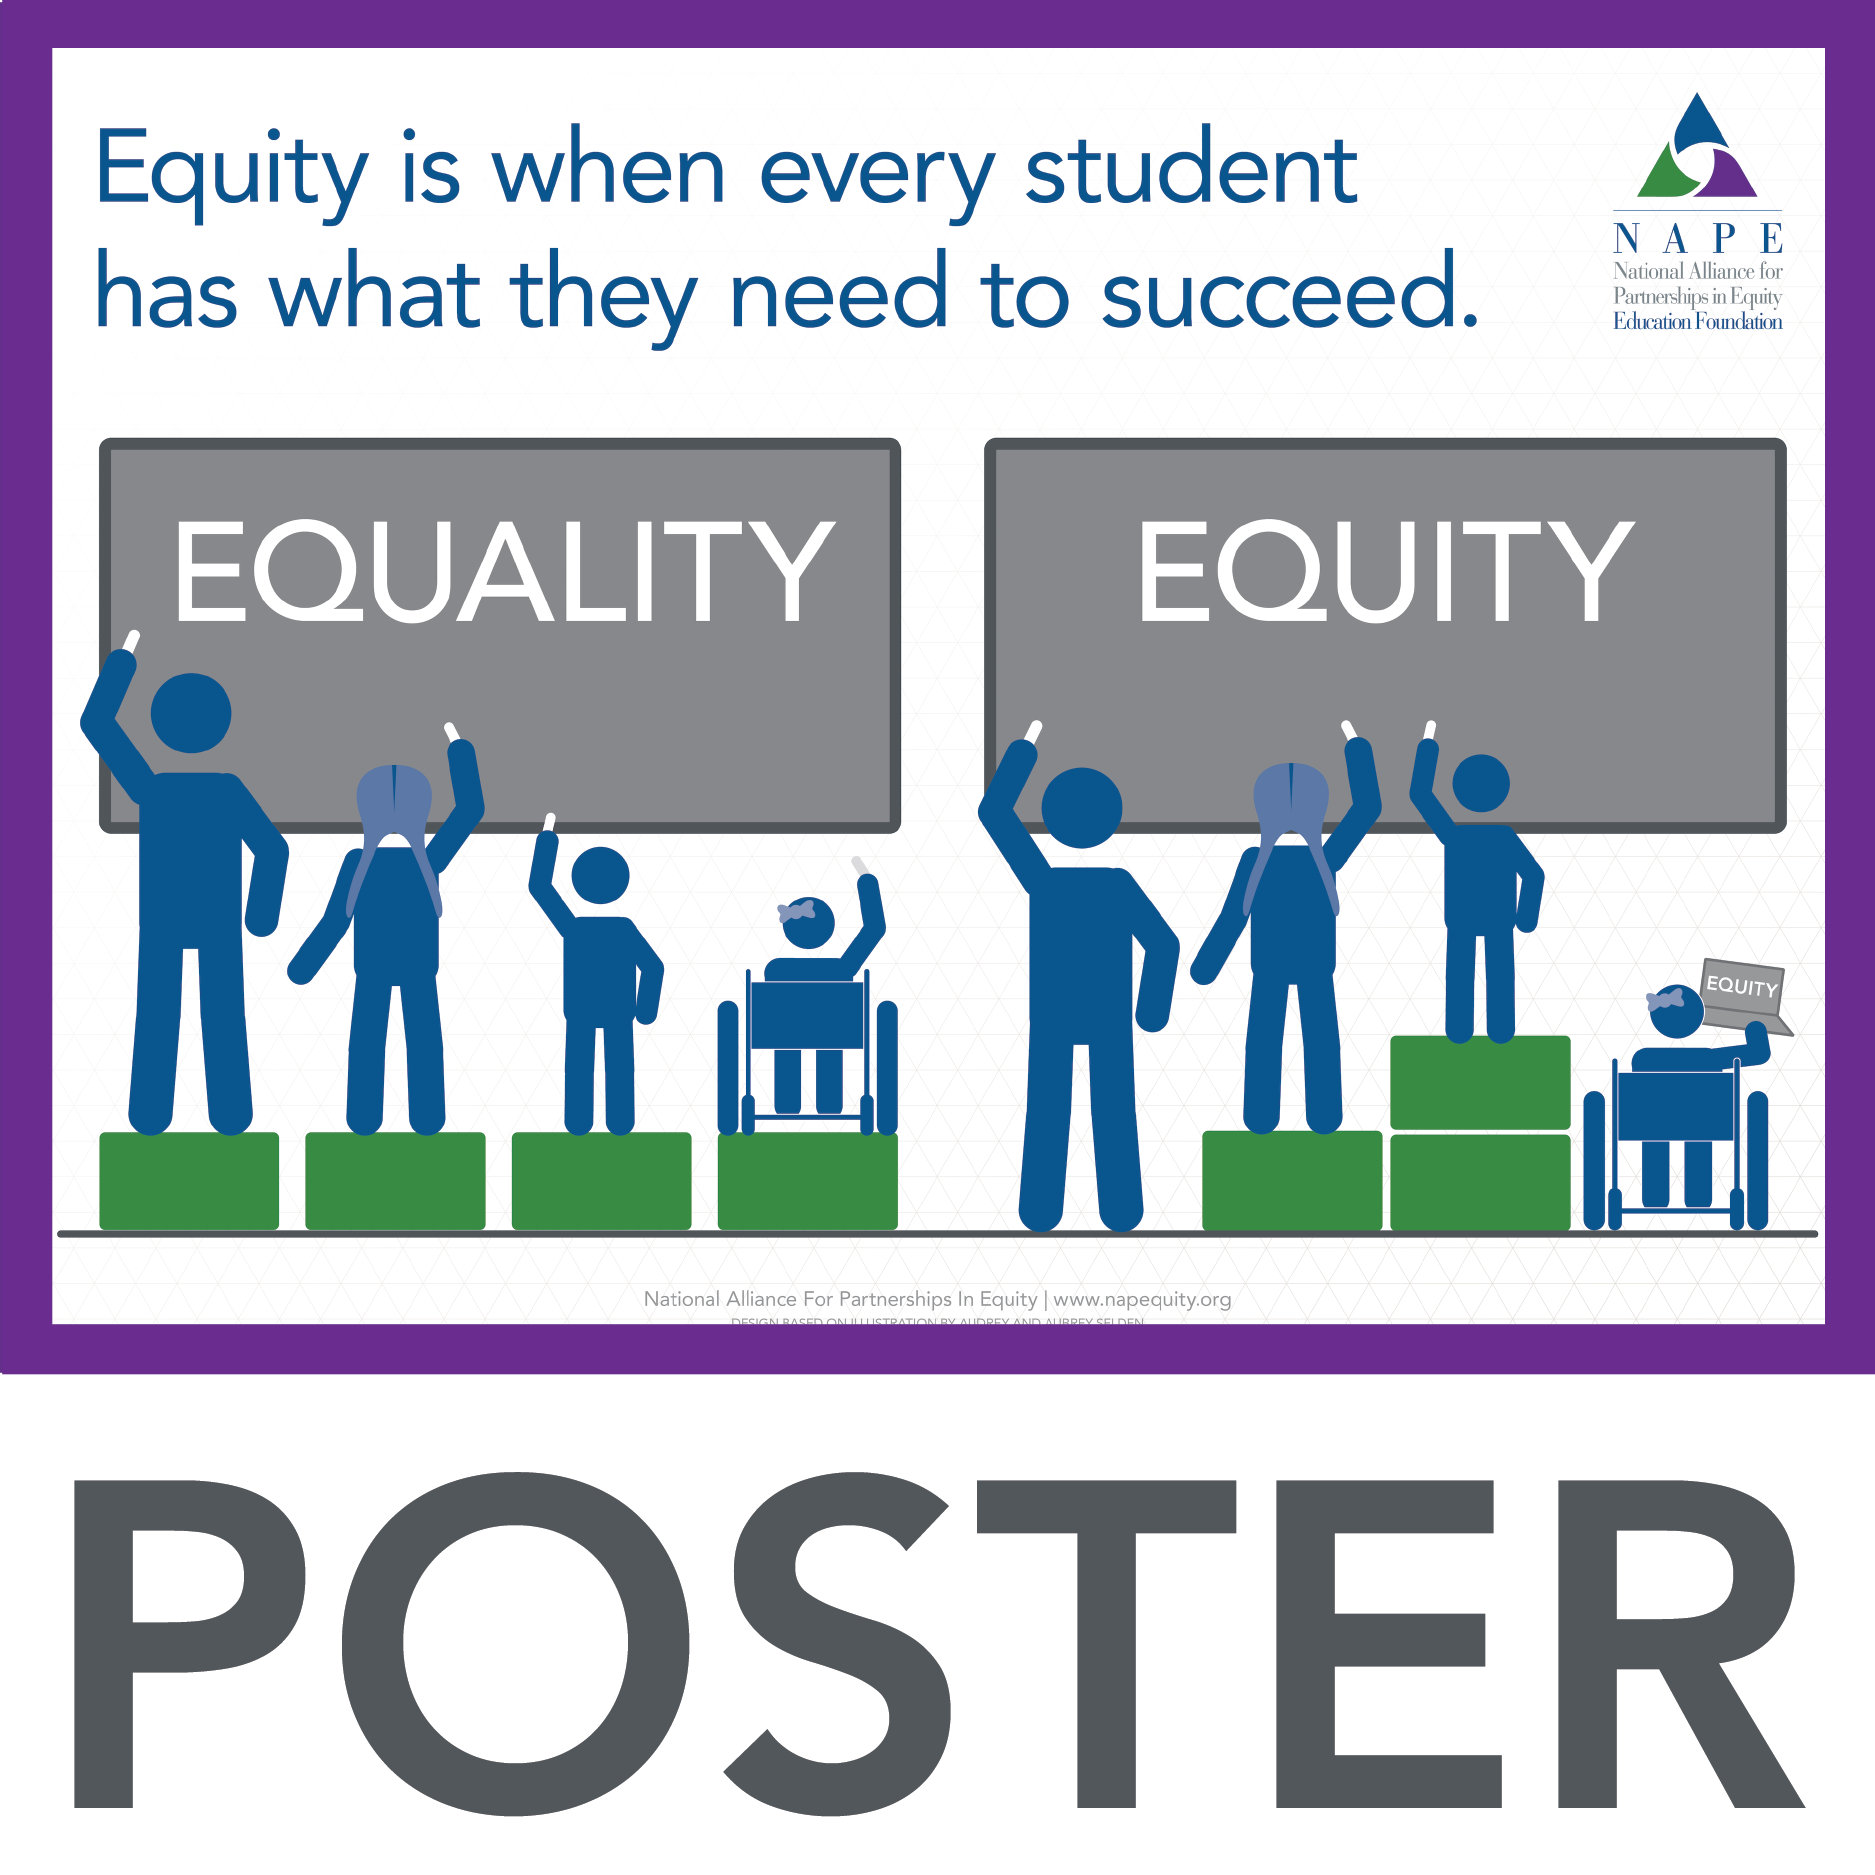 Equality vs. Equity Poster - NAPE | National for Partnerships Equity